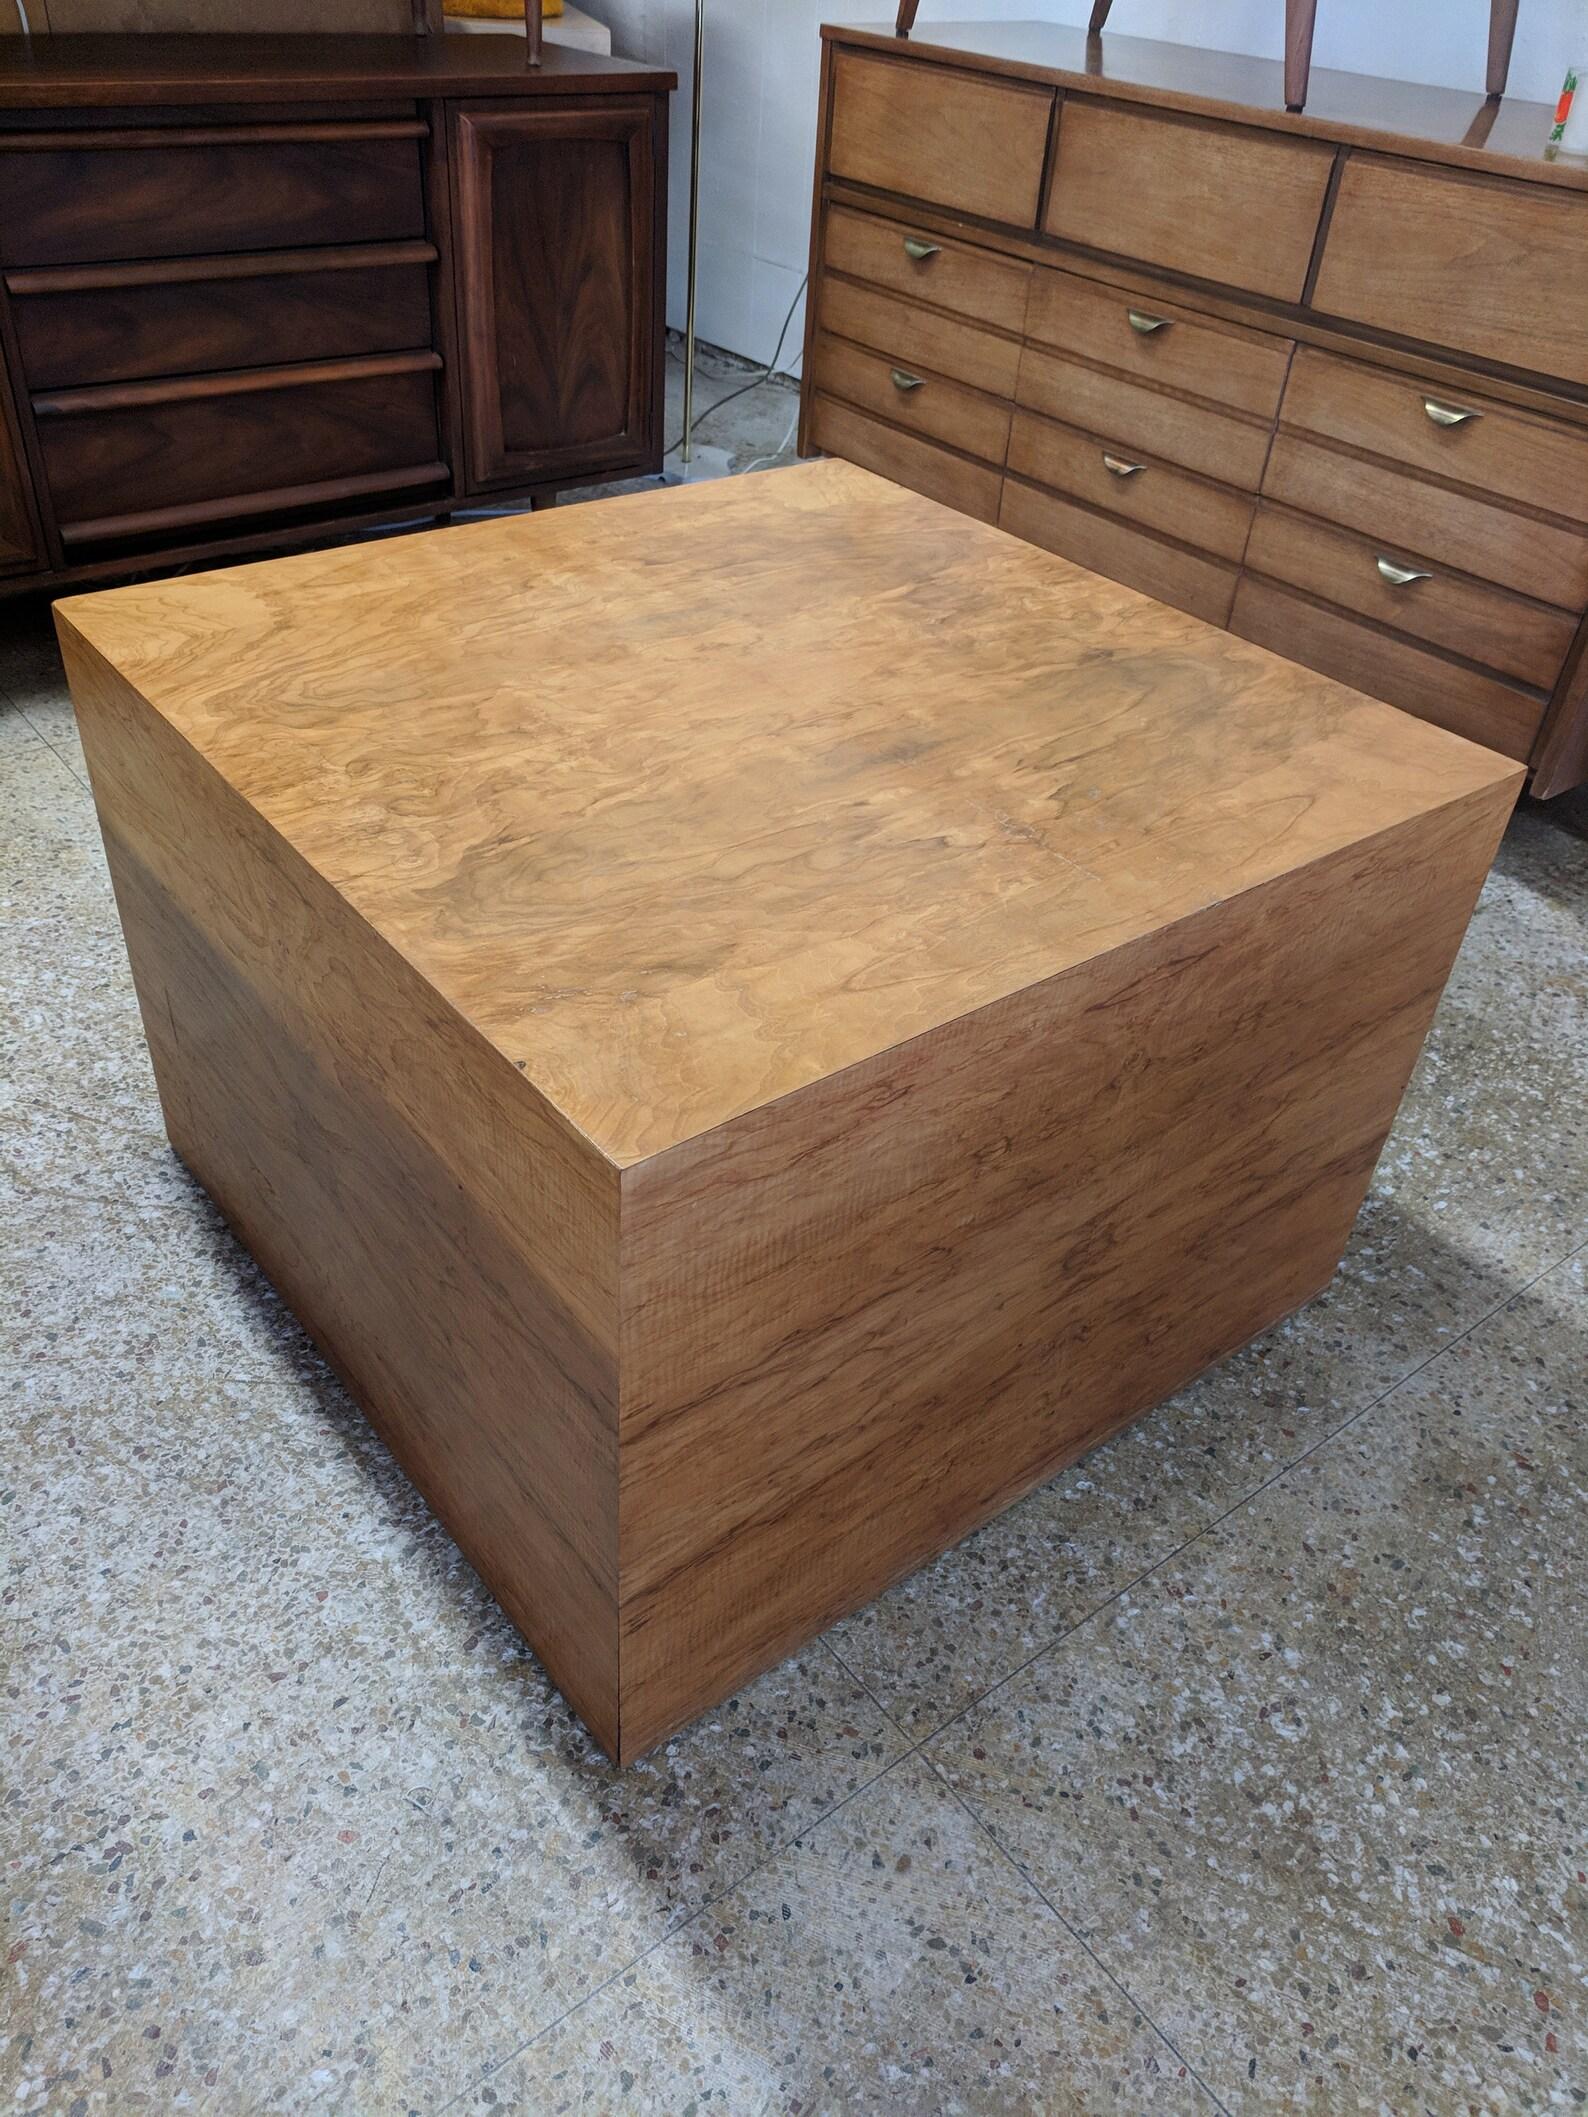 Mid Century Modern Milo Baughman Inspired Burlwood Cube Table

Good vintage condition and structurally sound. Veneer is ini good condition but finish does have a little wear in places.  Please message with any questions.
Scott

Additional